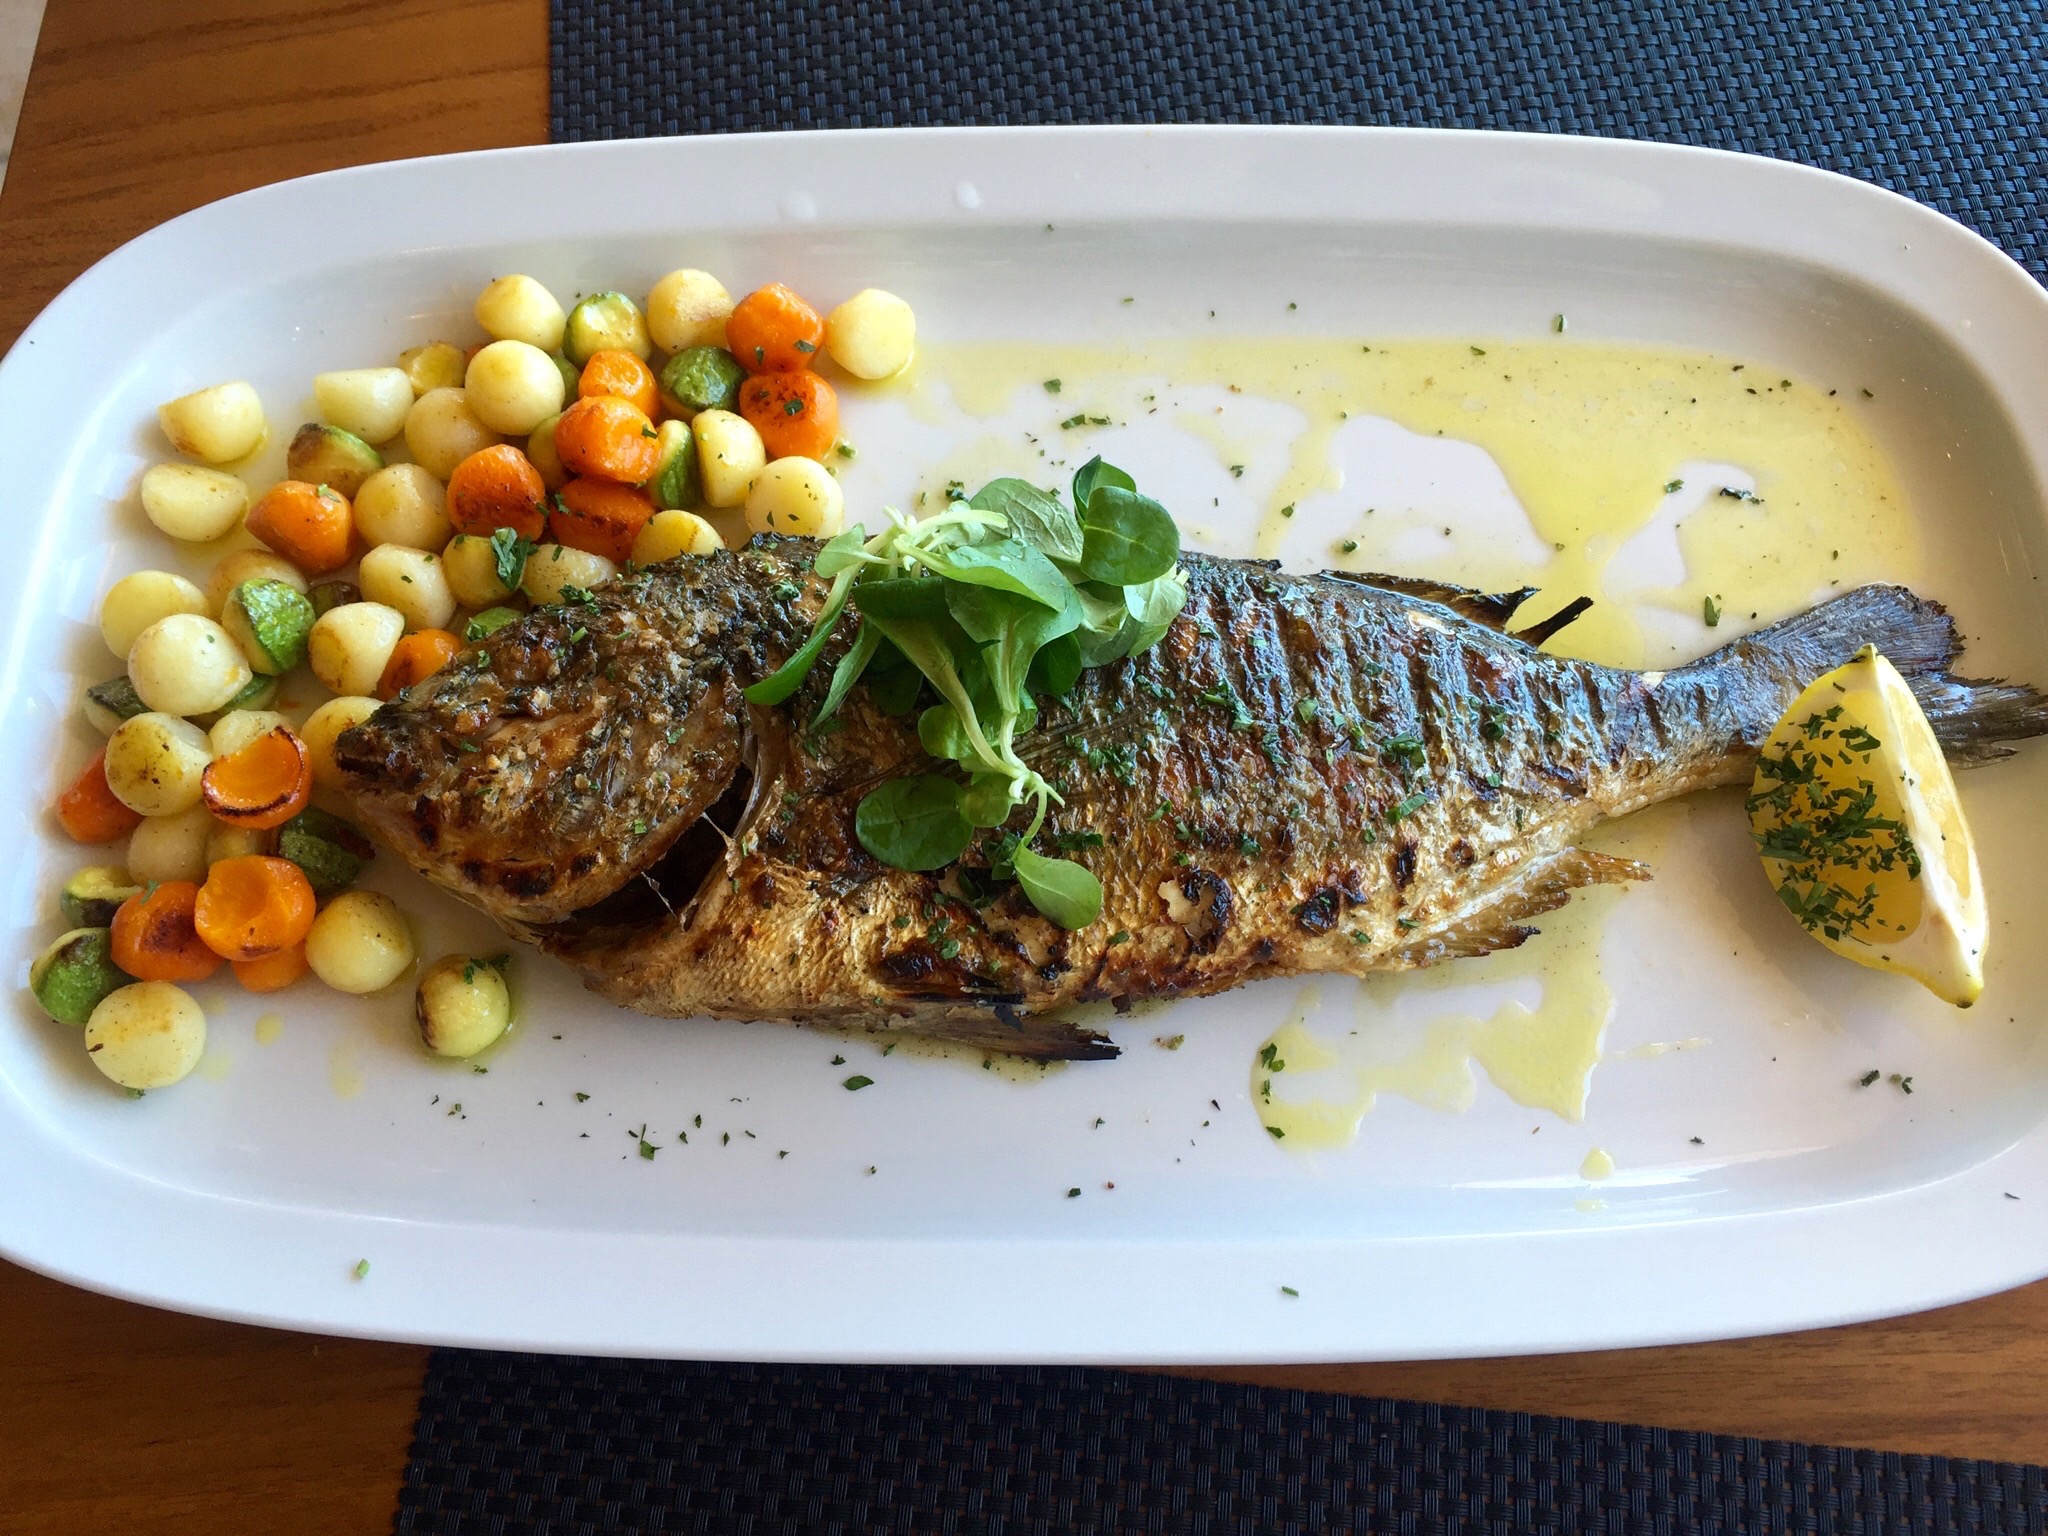 Loved eating this seabass which was caught that day! Seaside Restaurant, Santorini